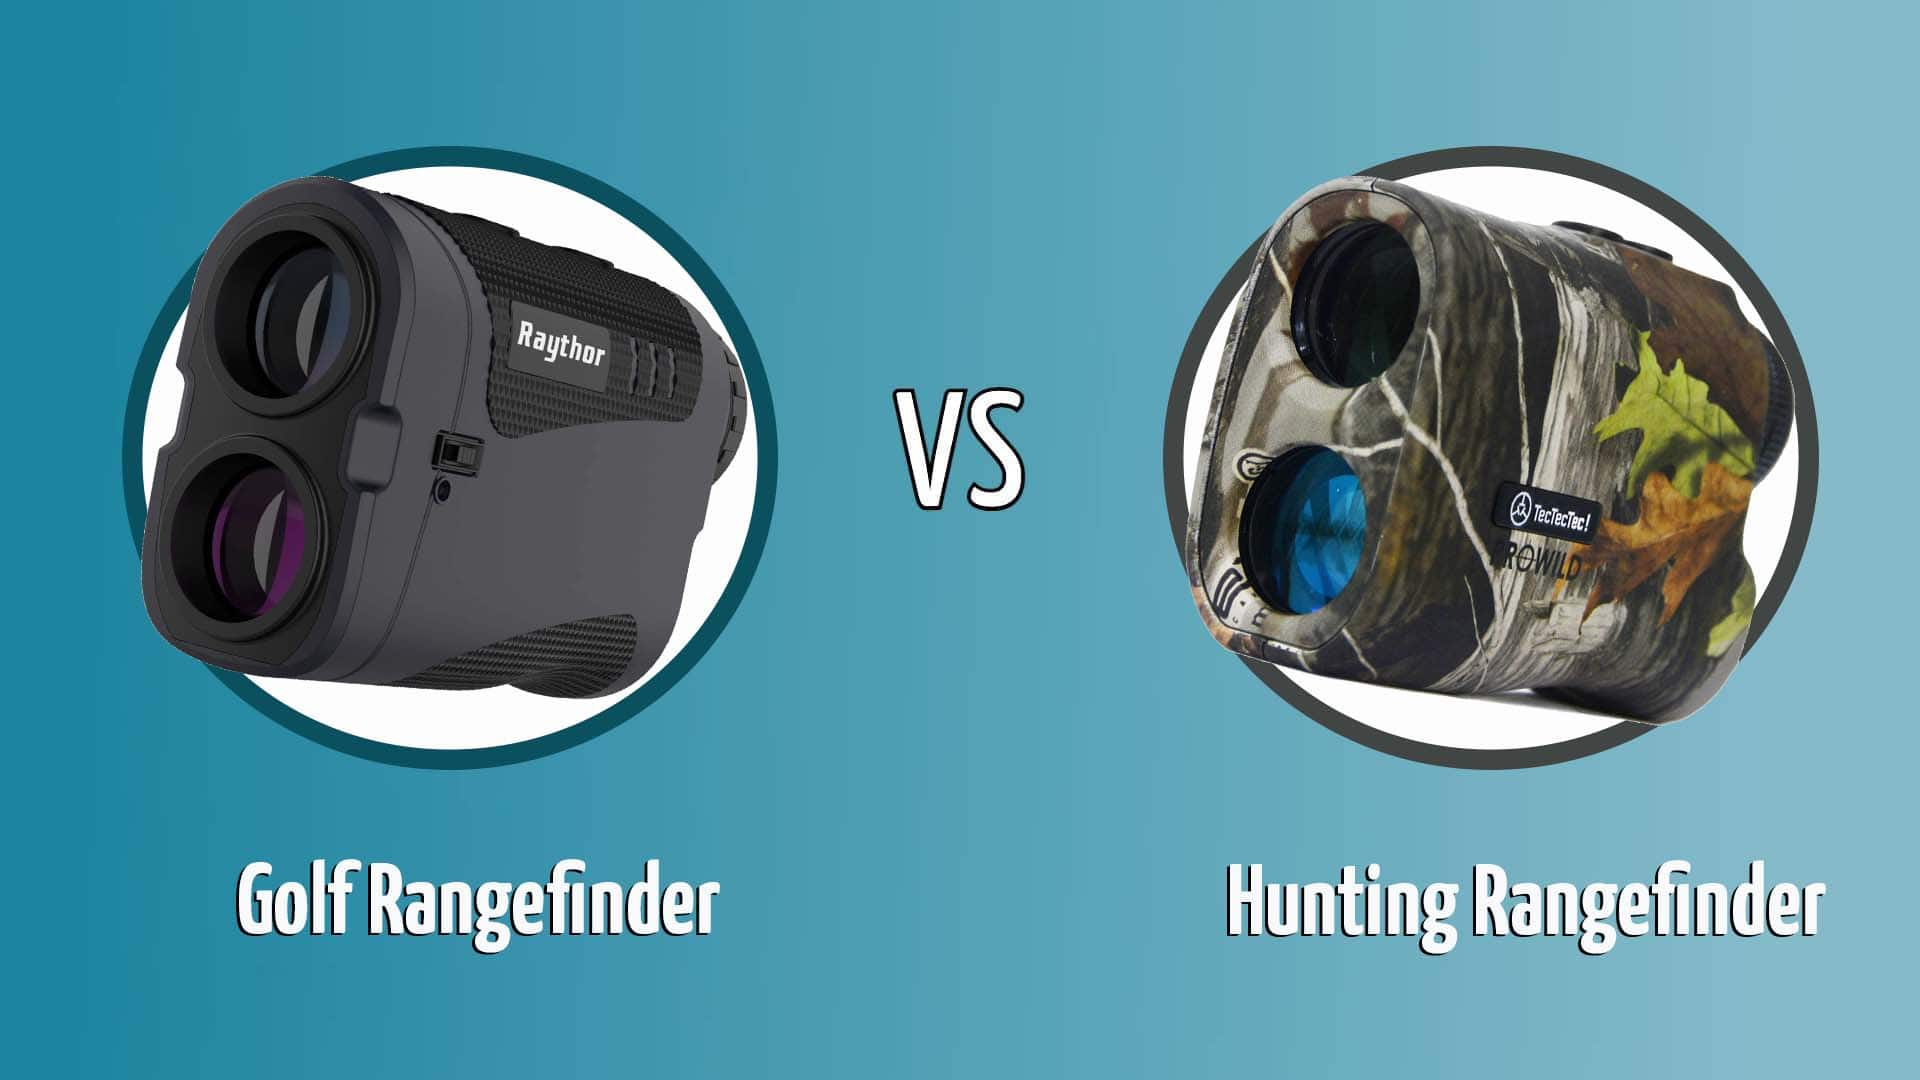 Are Golf And Hunting Rangefinders the Same? 